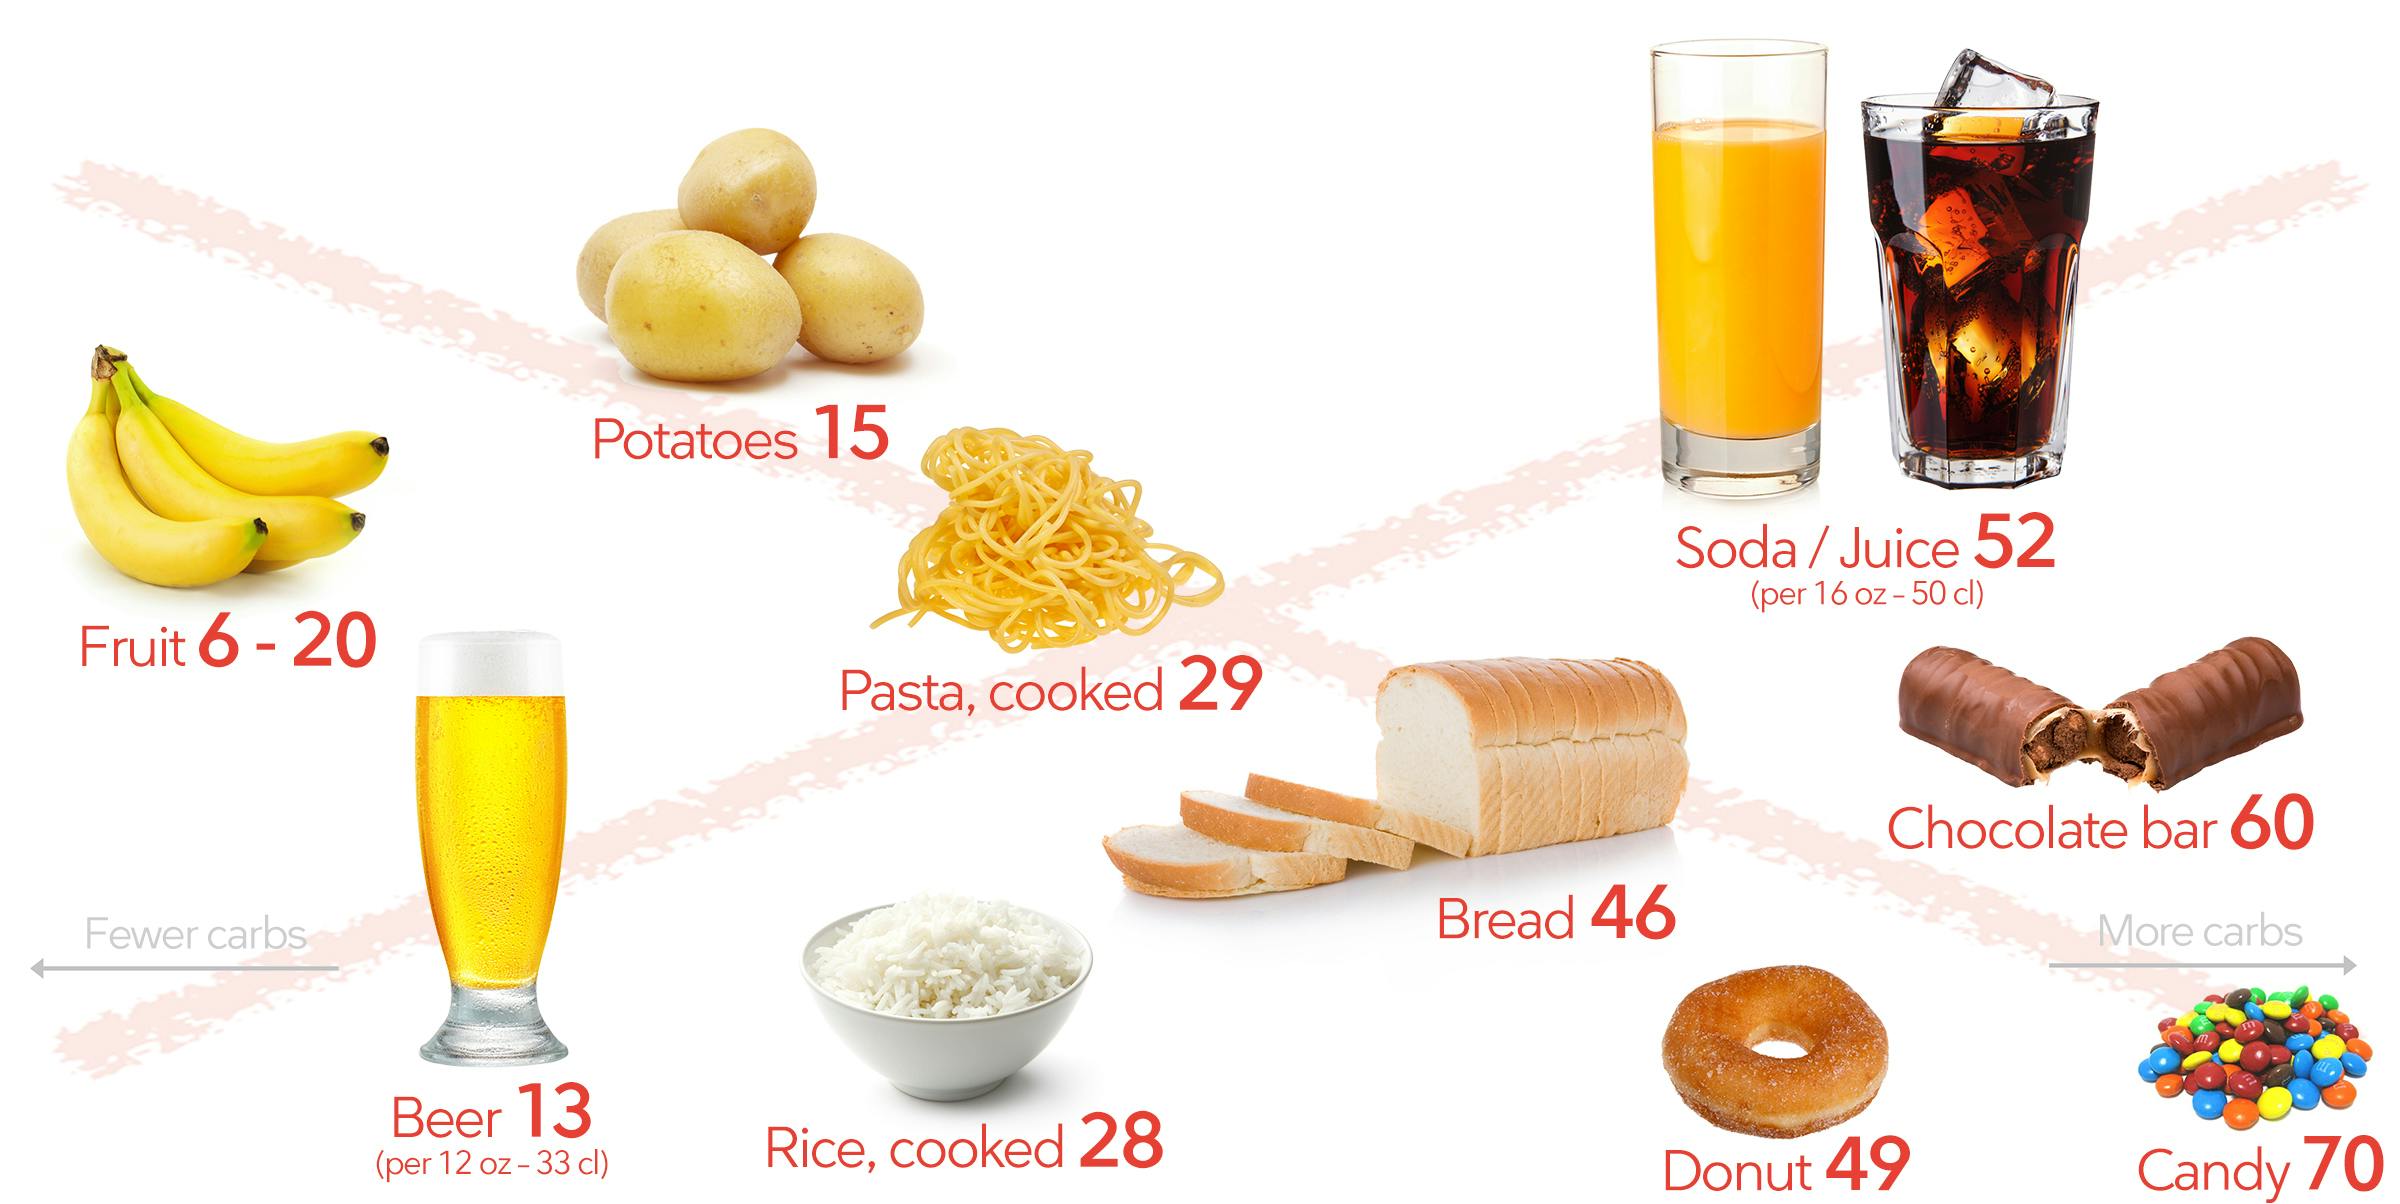 Foods to avoid on low carb: bread, pasta, rice, potatoes, fruit, beer, soda, juice, candy